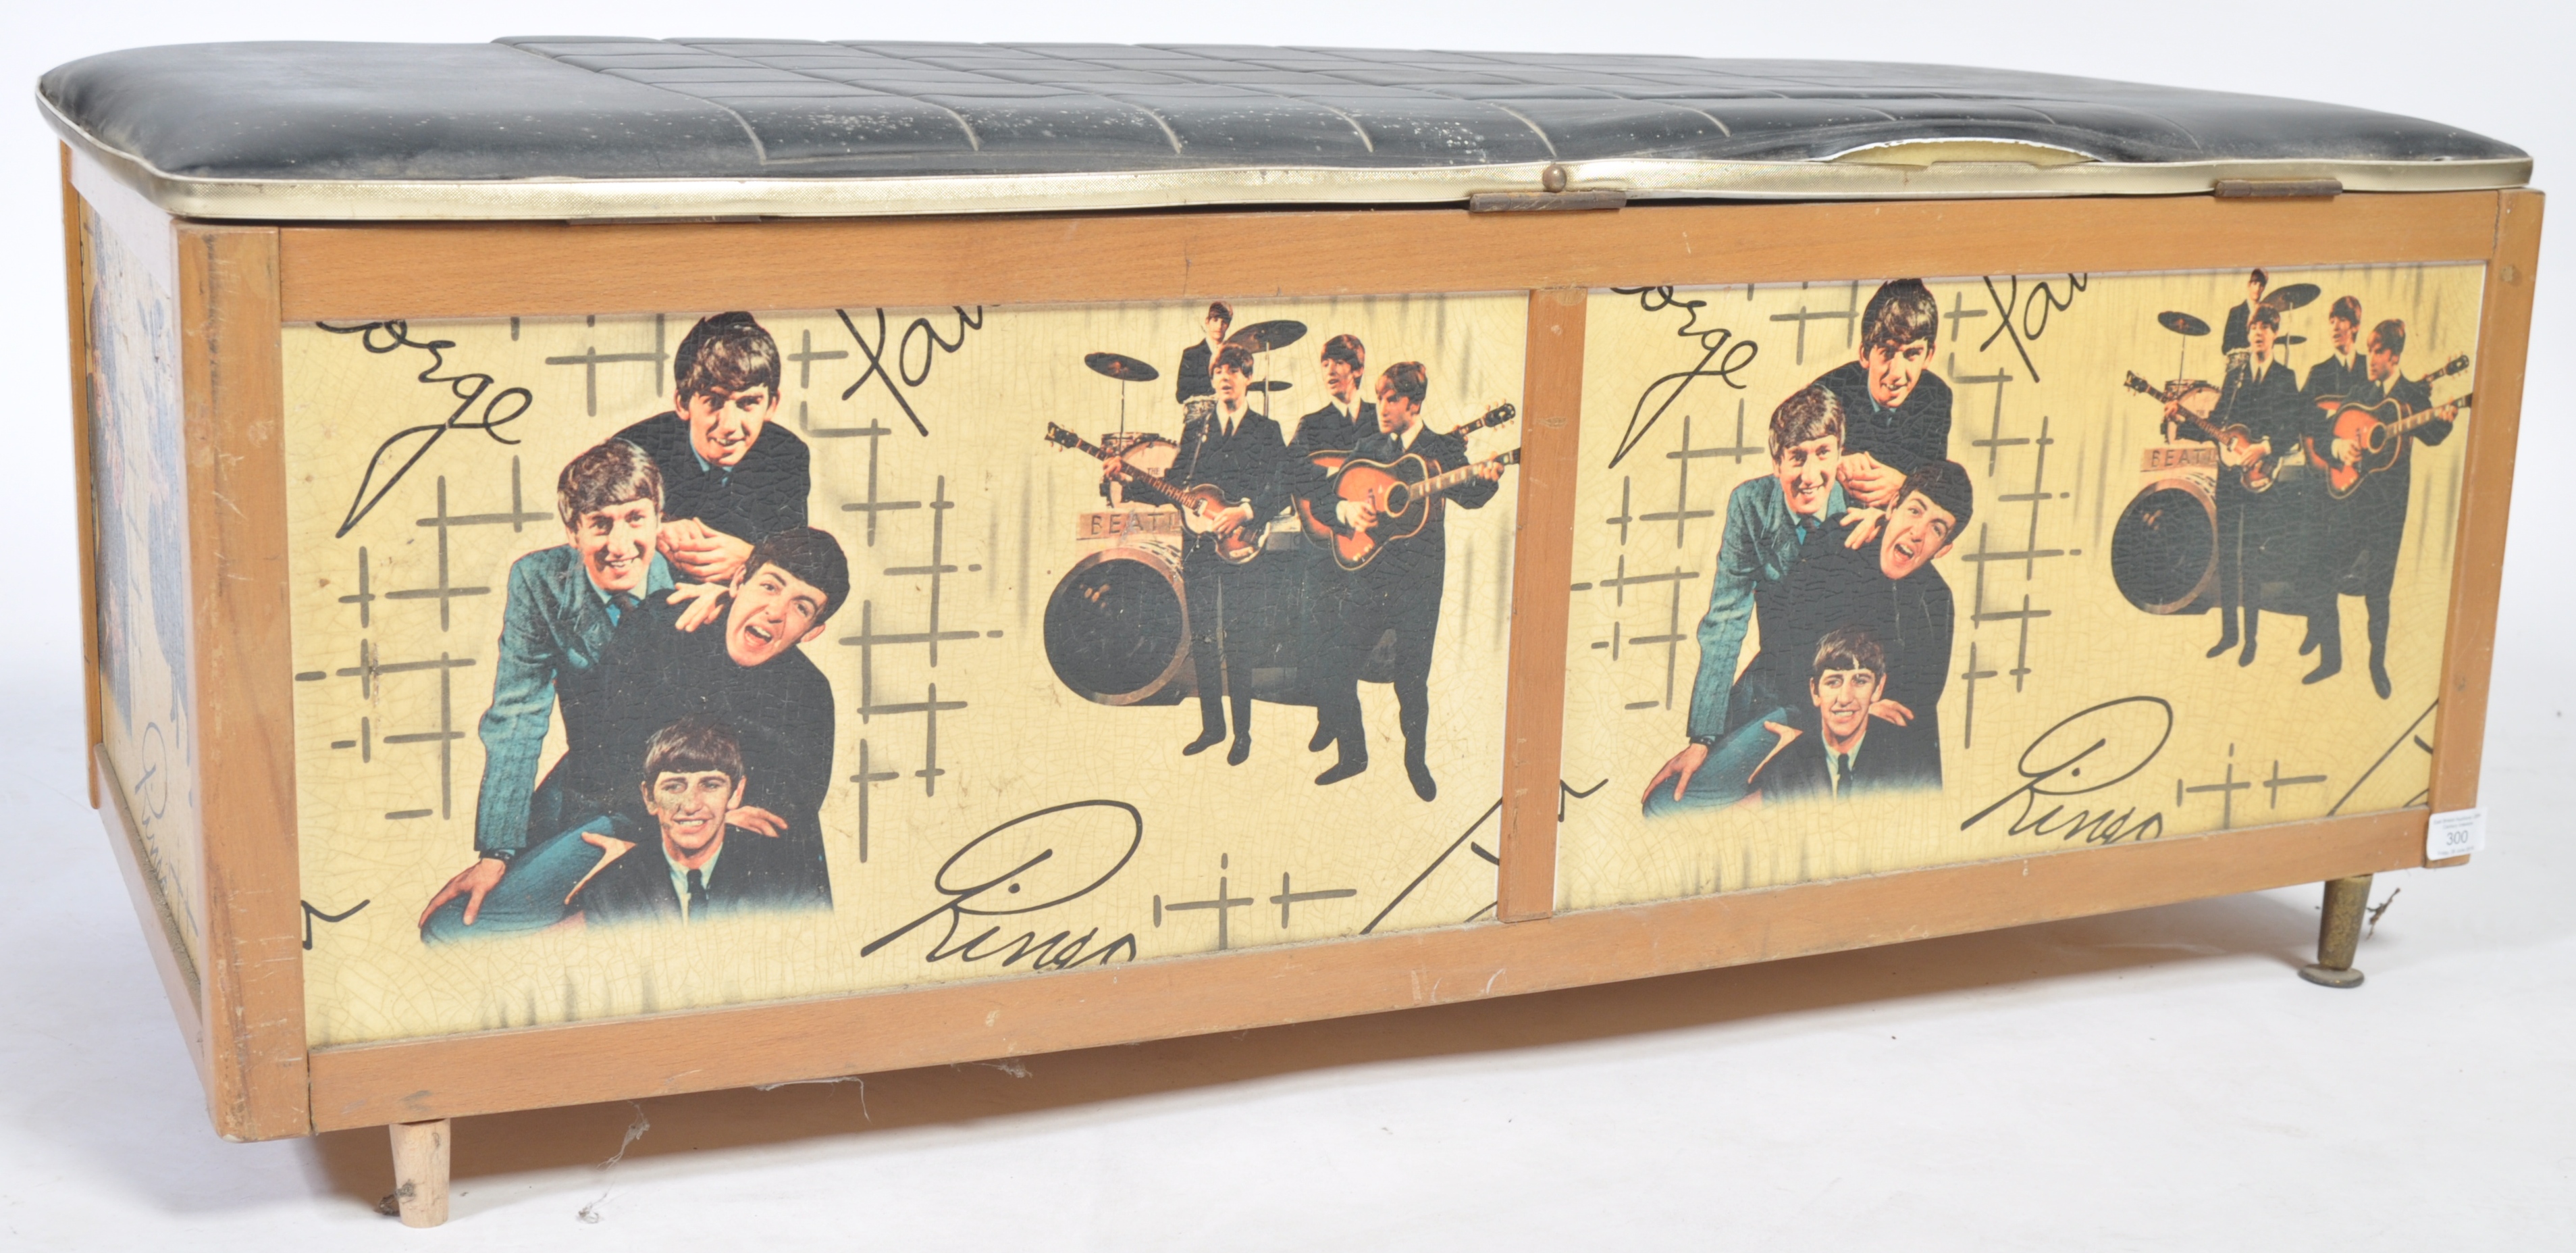 RARE 1960'S BEATLES OTTOMAN / BLANKET BOX BY AVALO - Image 3 of 8